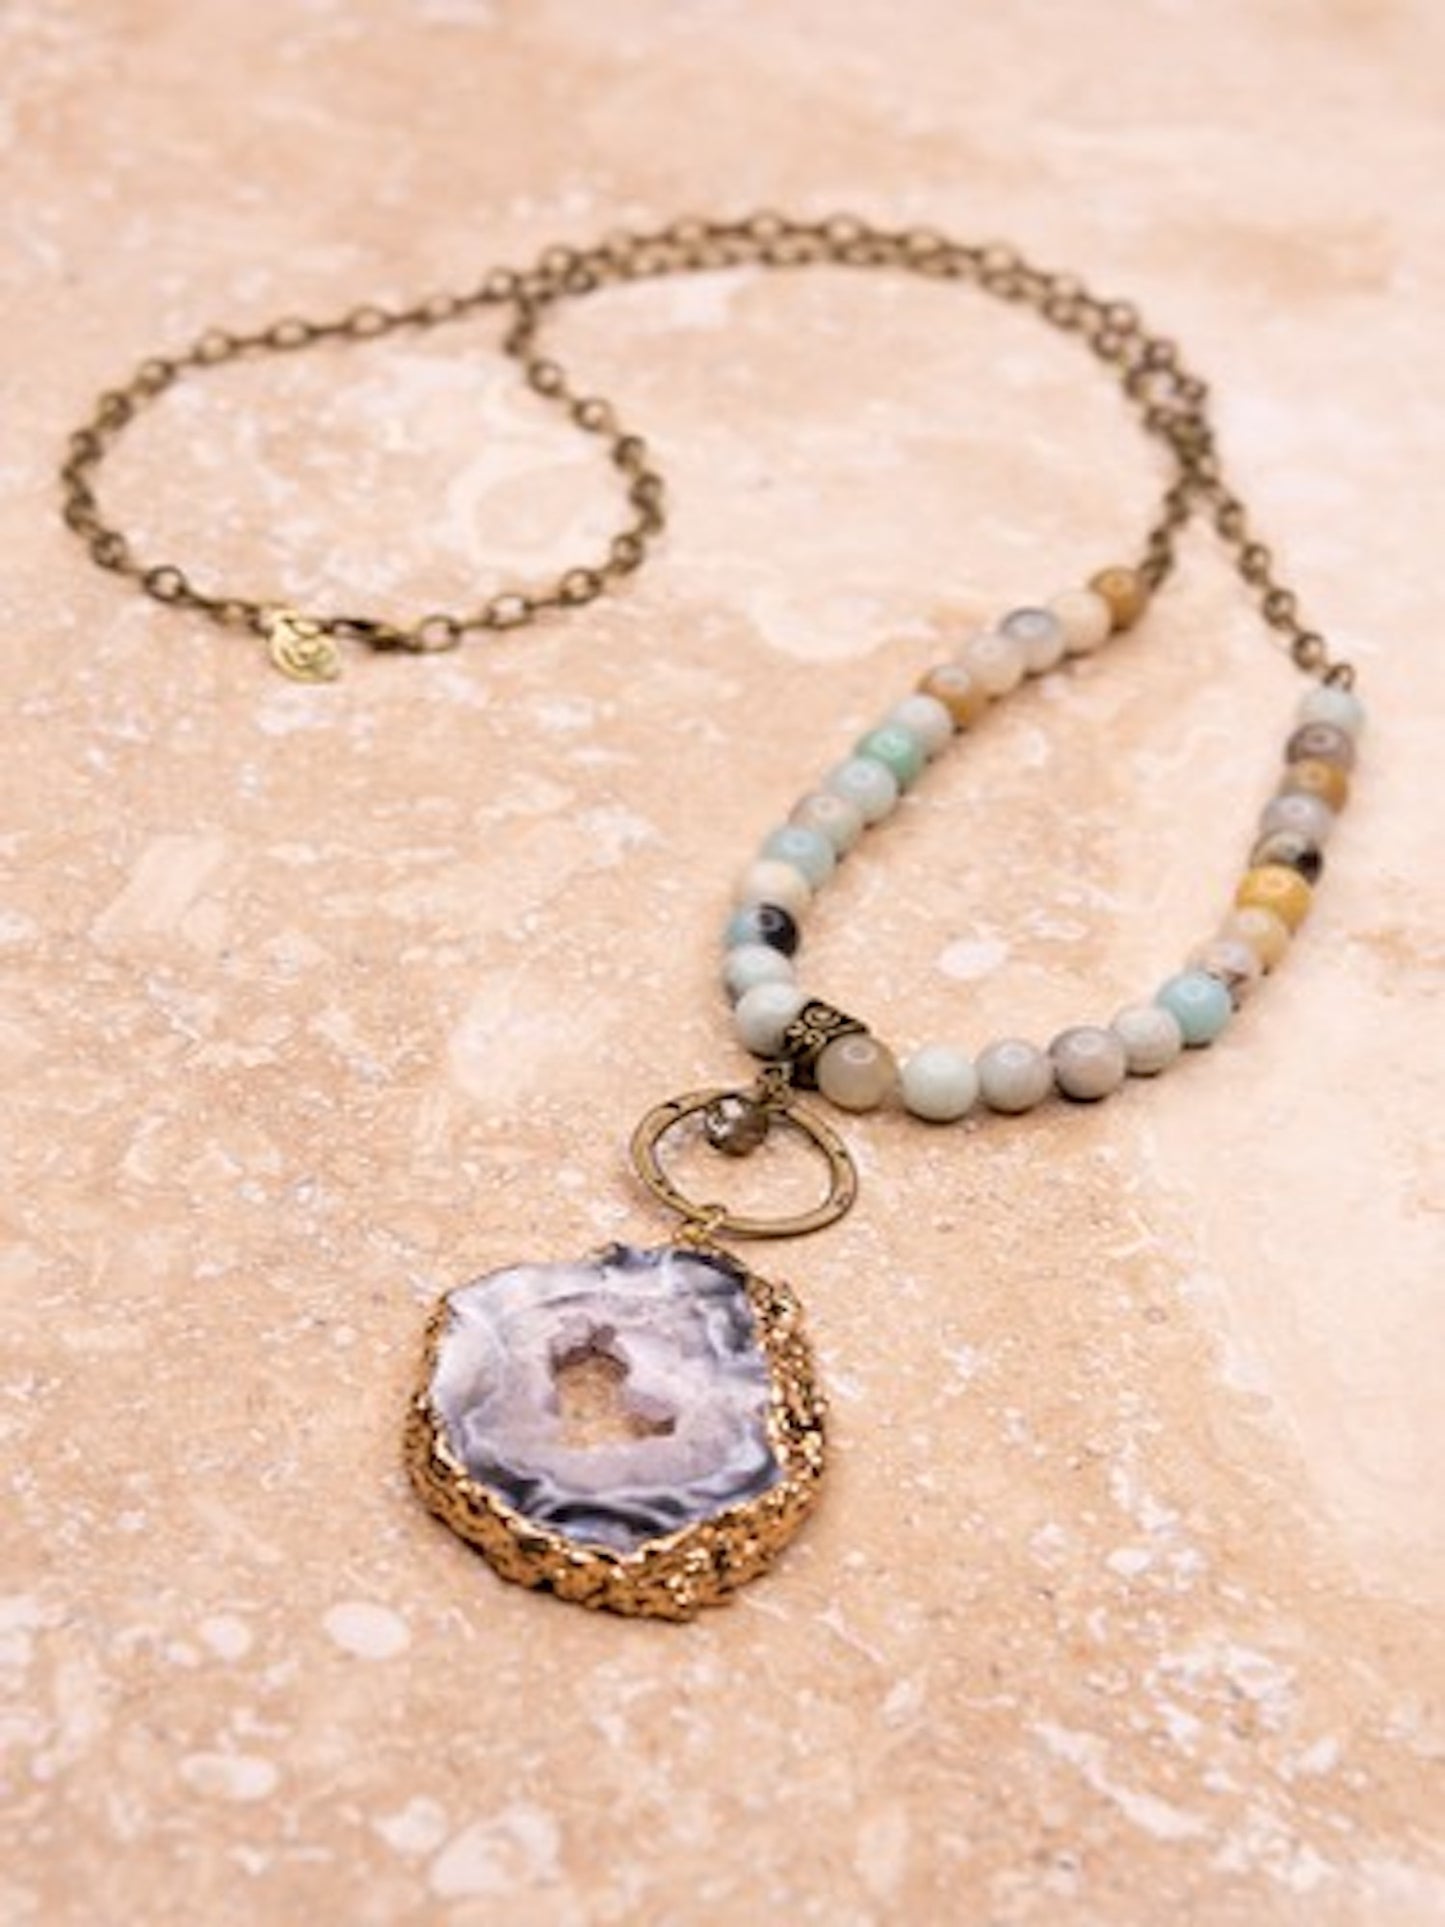 The Open Stone Necklace